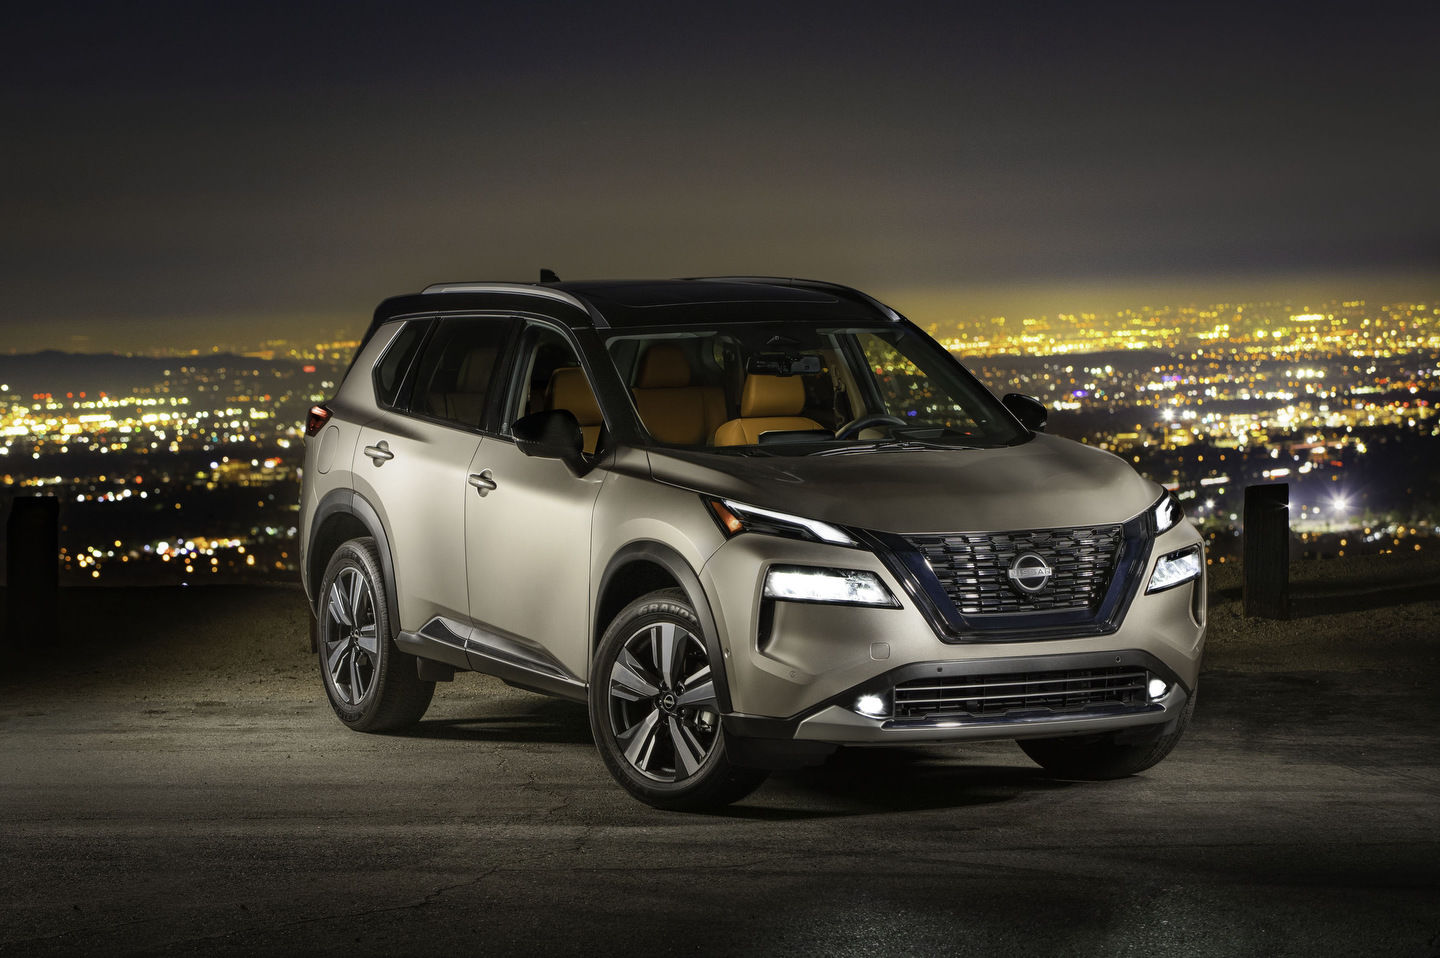 2022 Nissan Rogue: Its popularity is easily explained